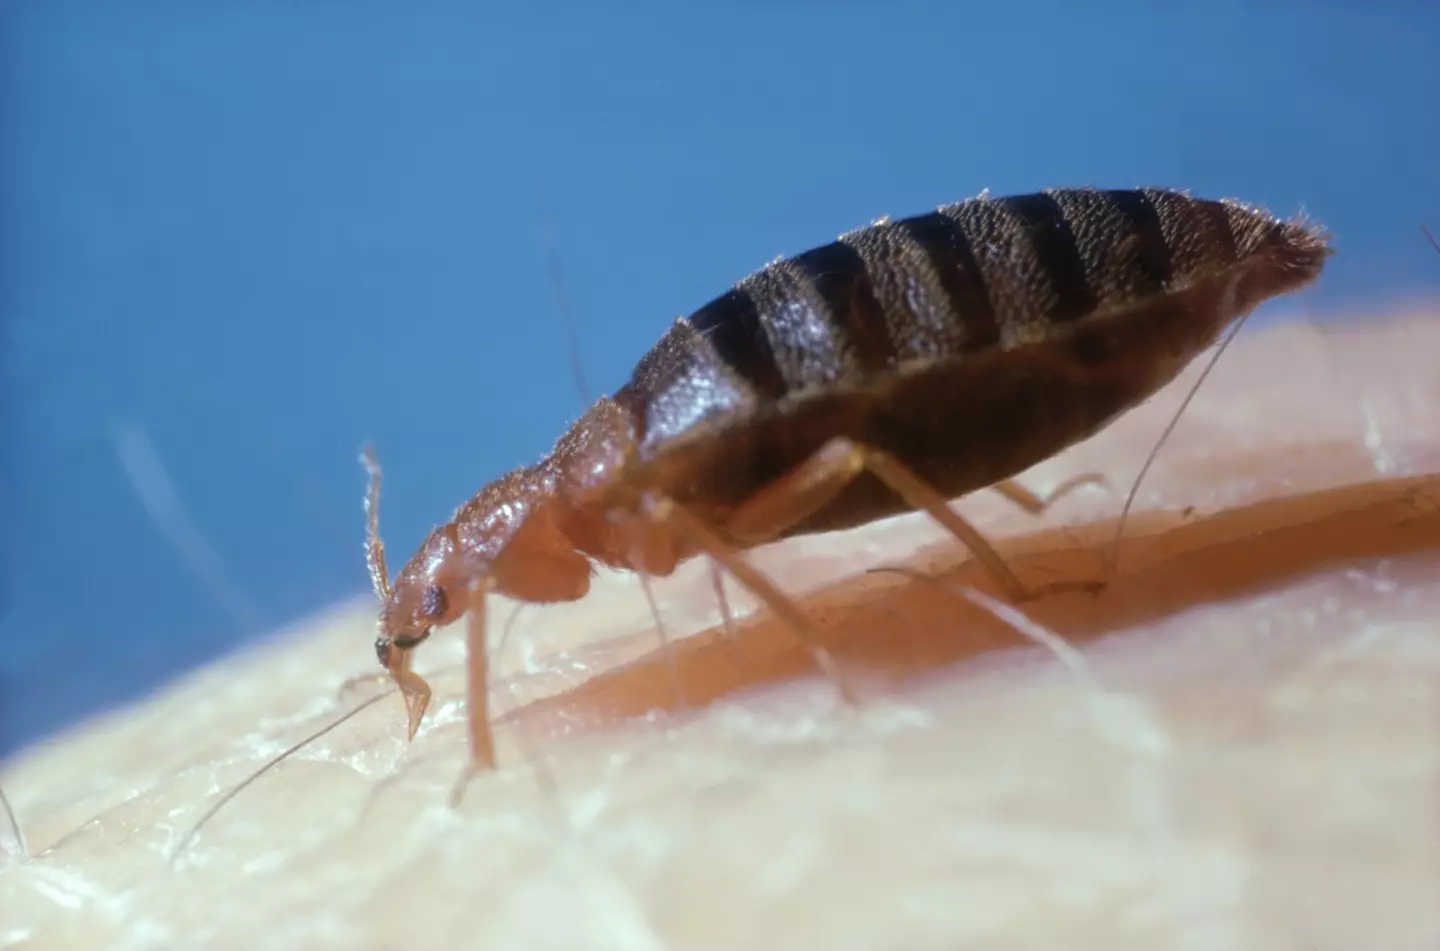 Bed bugs feed on blood.